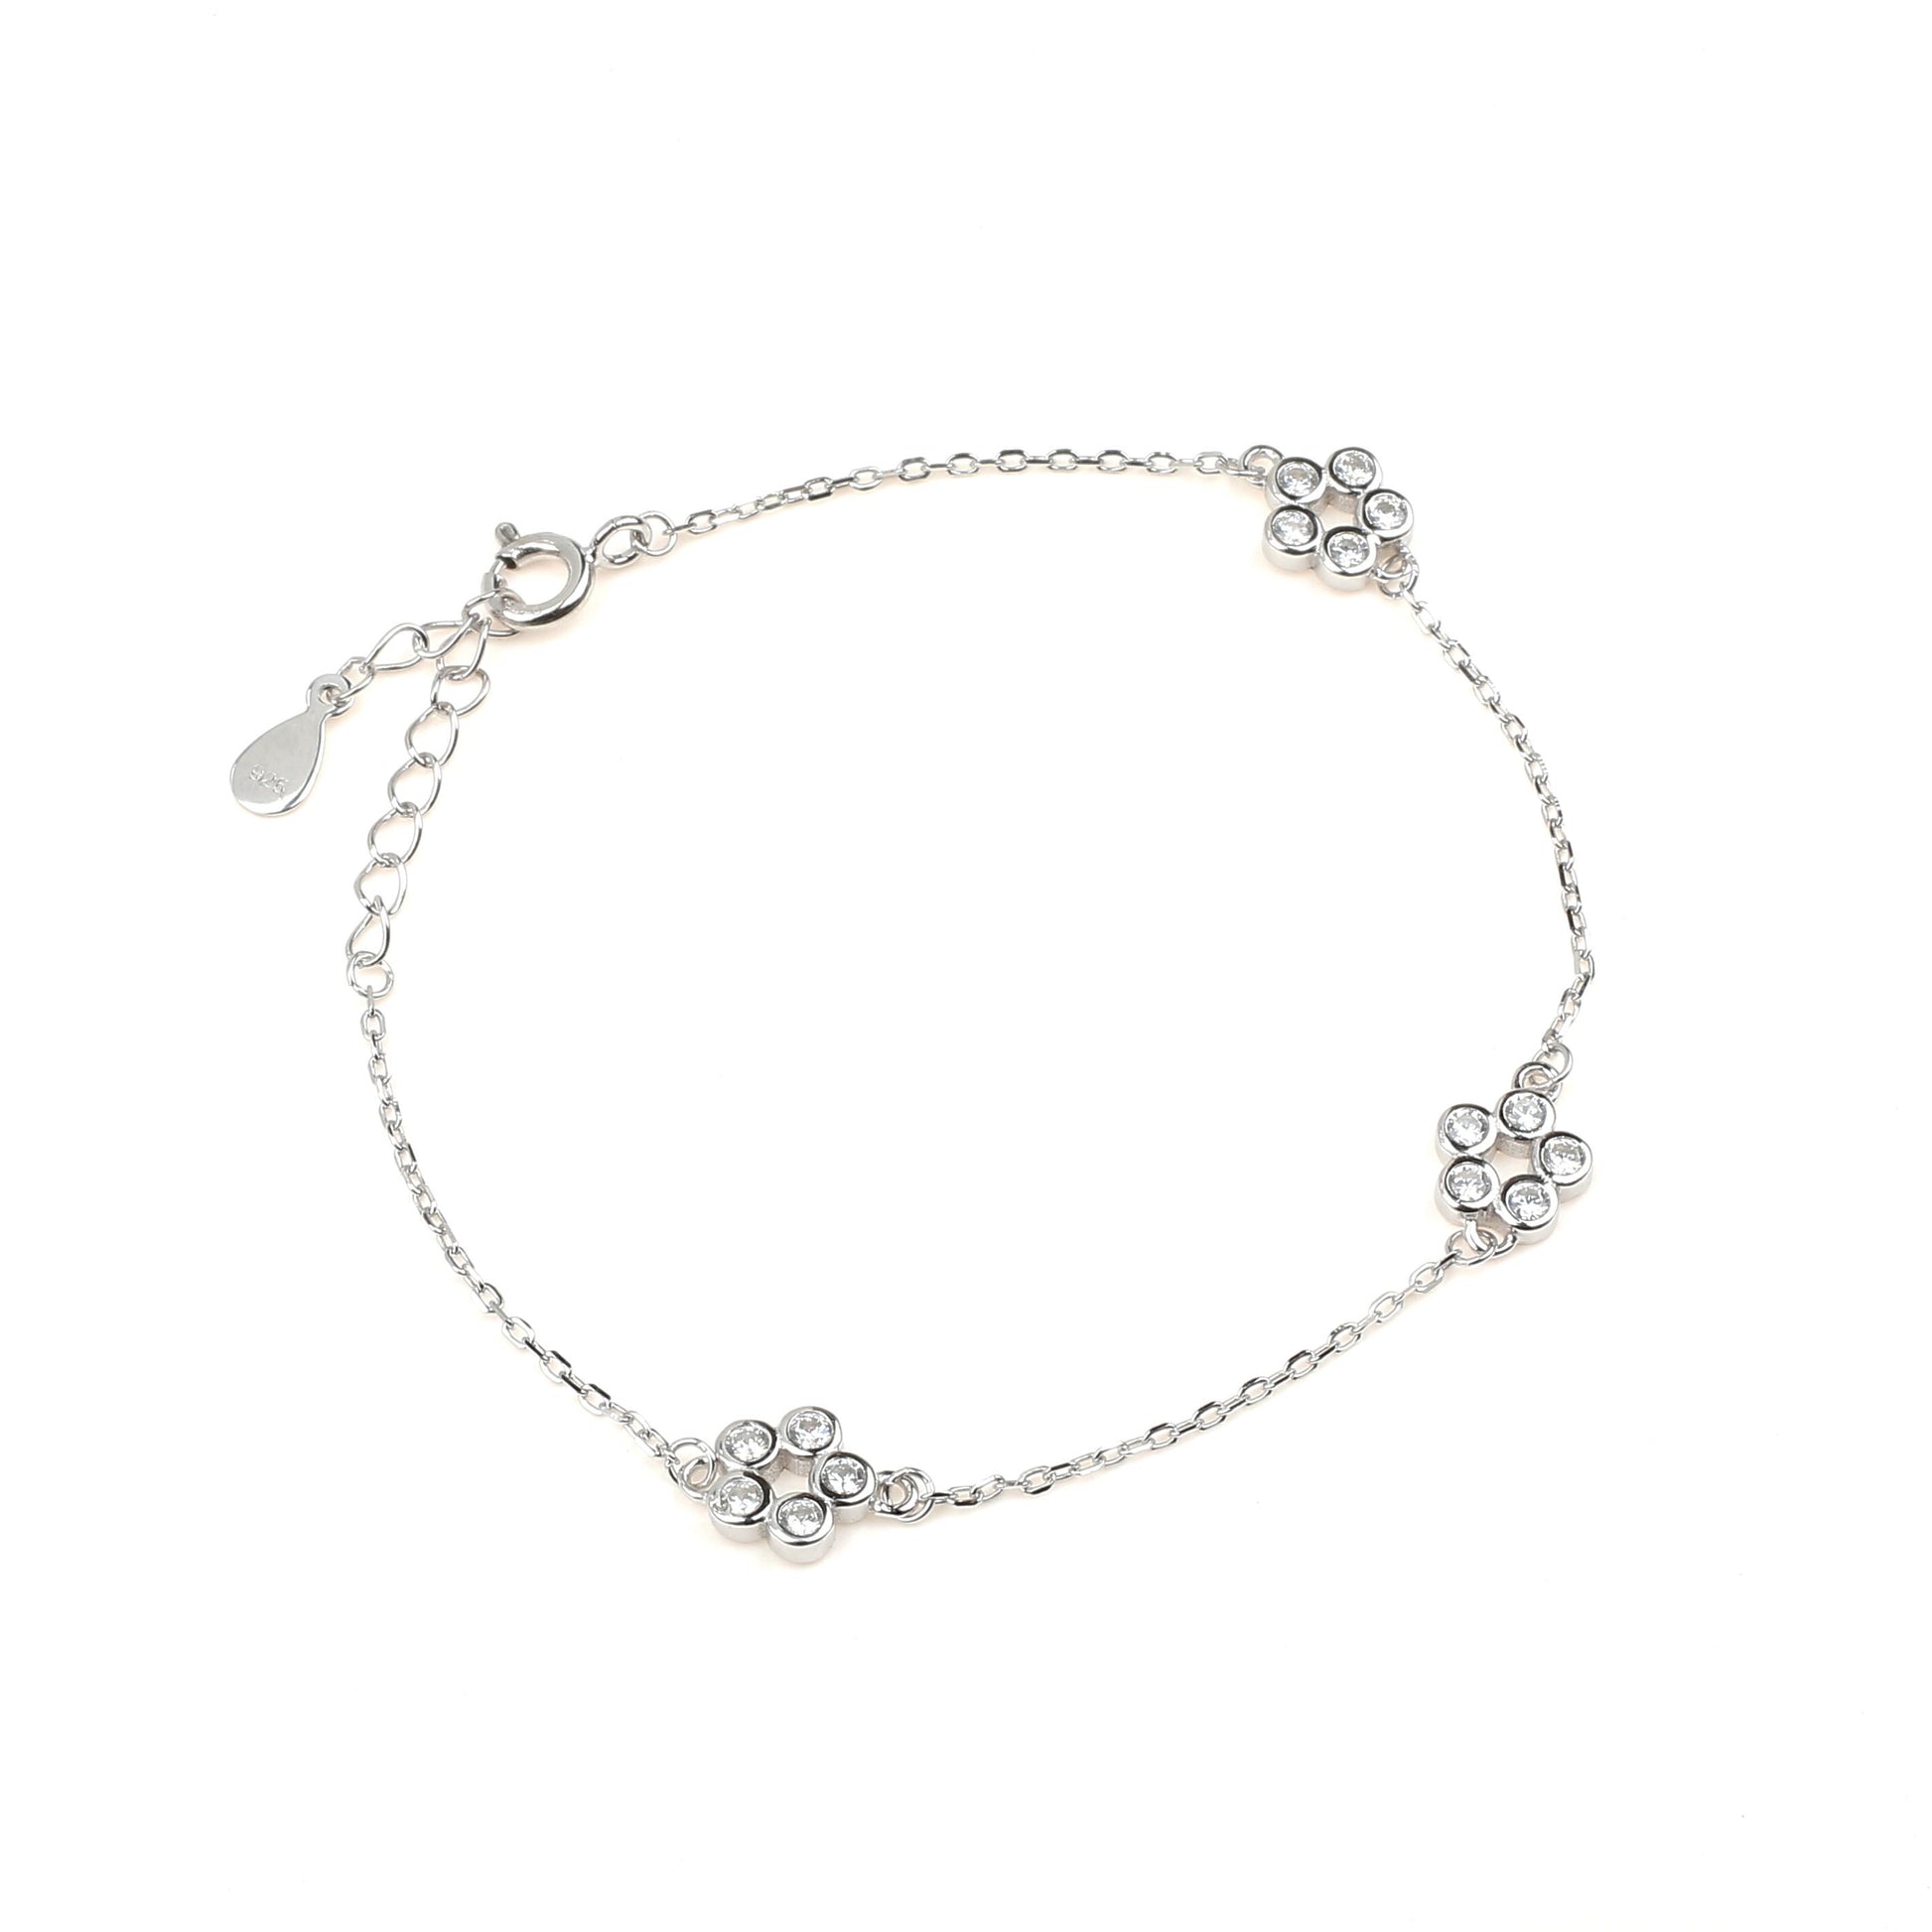 white stone studded flowers with inside hollow star 925 sterling silver bracelet with link chain and spring ring clasp 